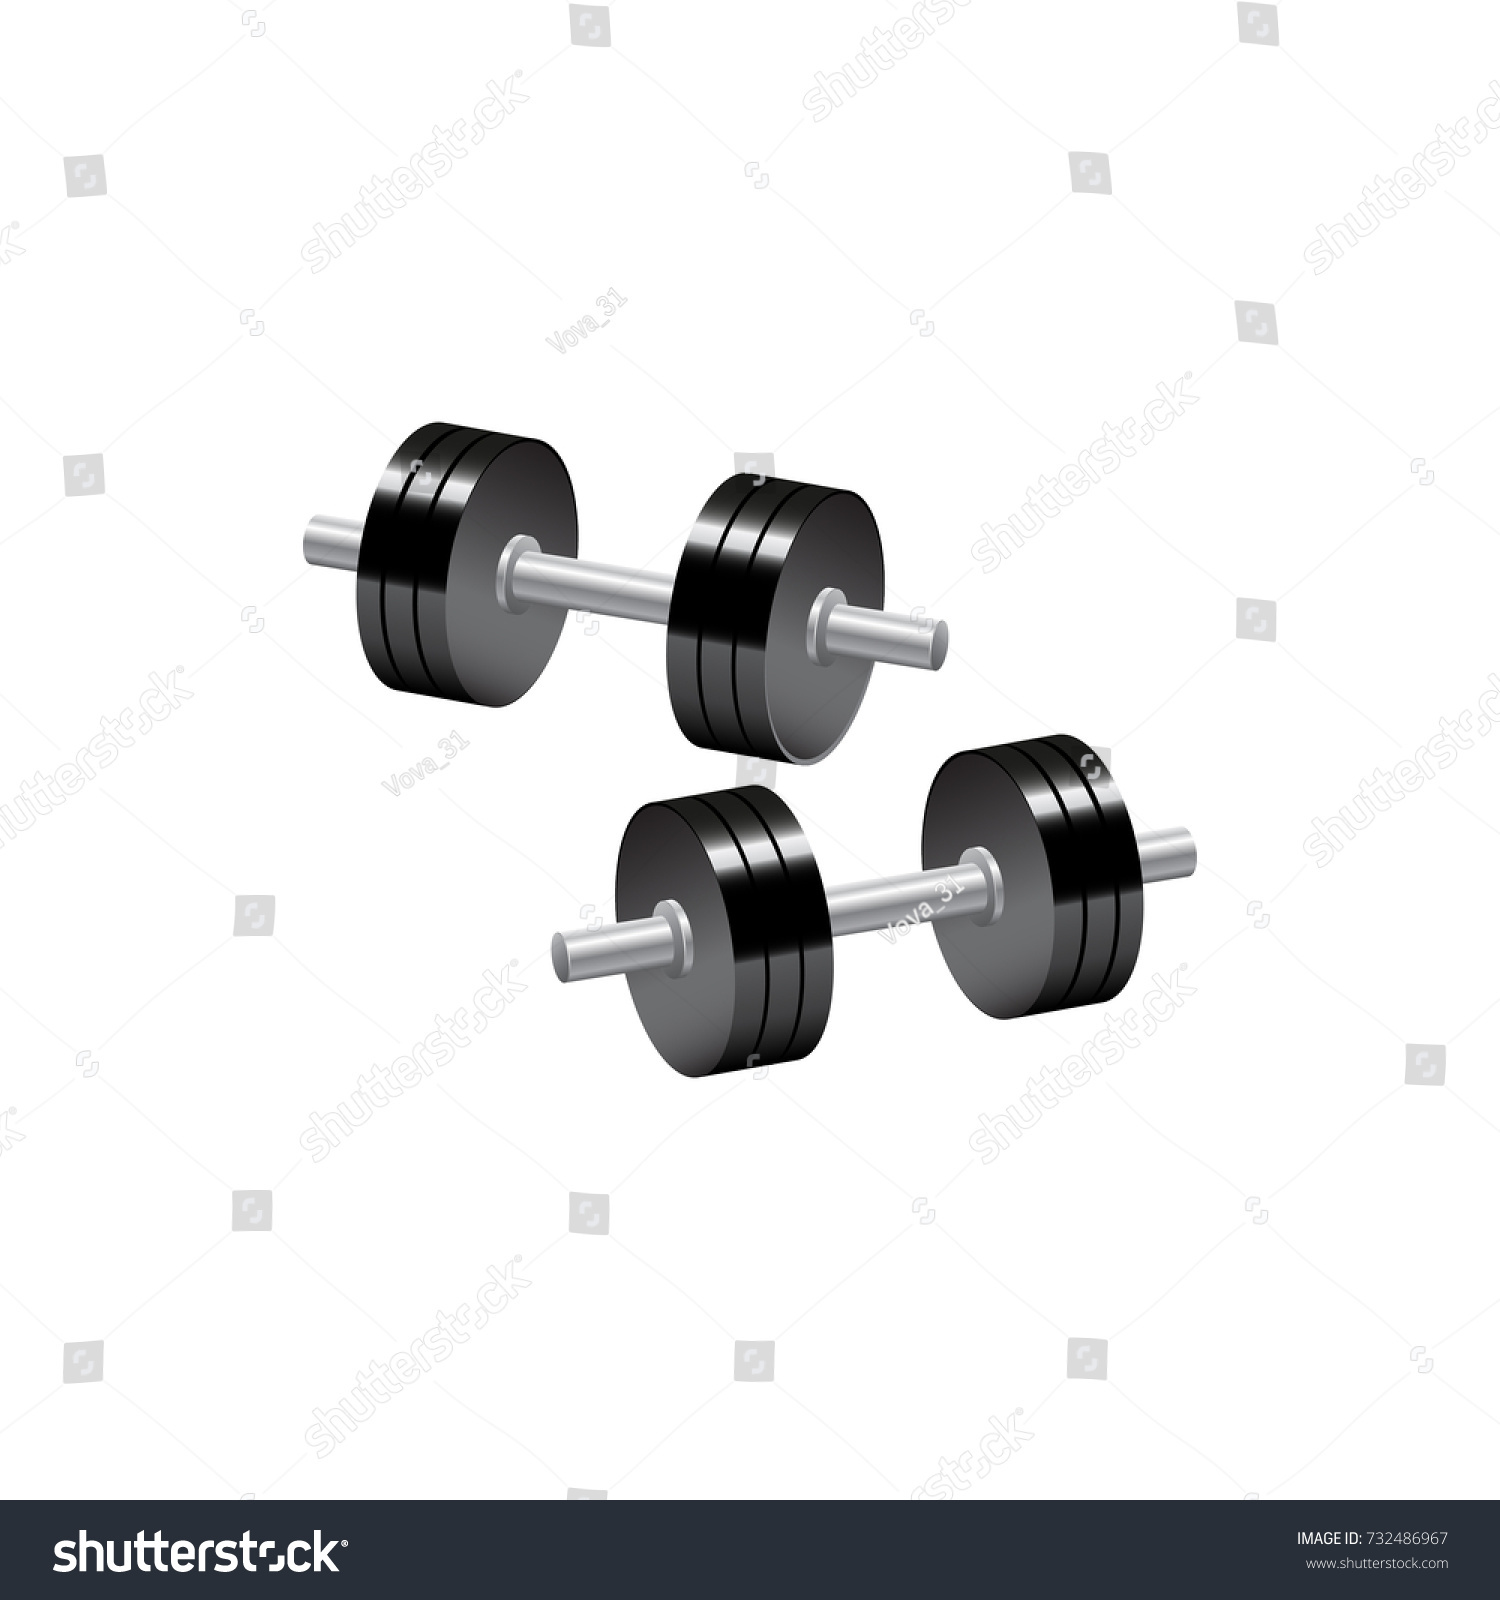 Two Dumbbells Leaning Clipping Path Stock Vector 732486967 ...